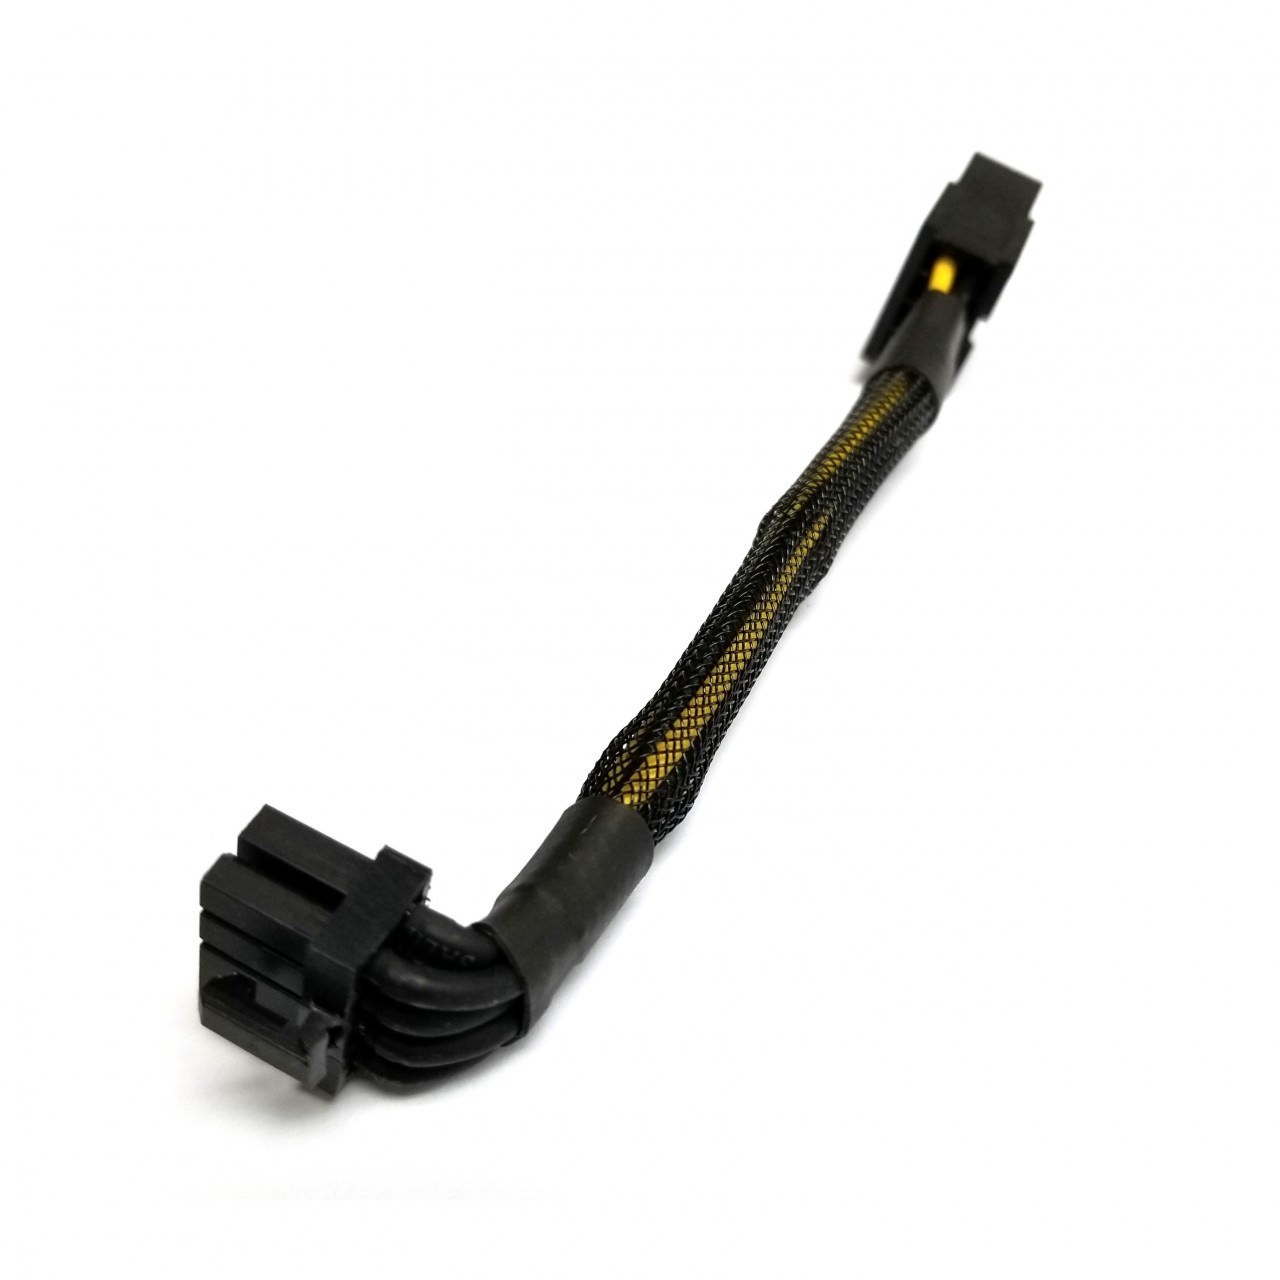 ➨➨➨ Sleeved 8" PCI-E 8 PIN Right Bend PWR Extender Low Profile Cable 